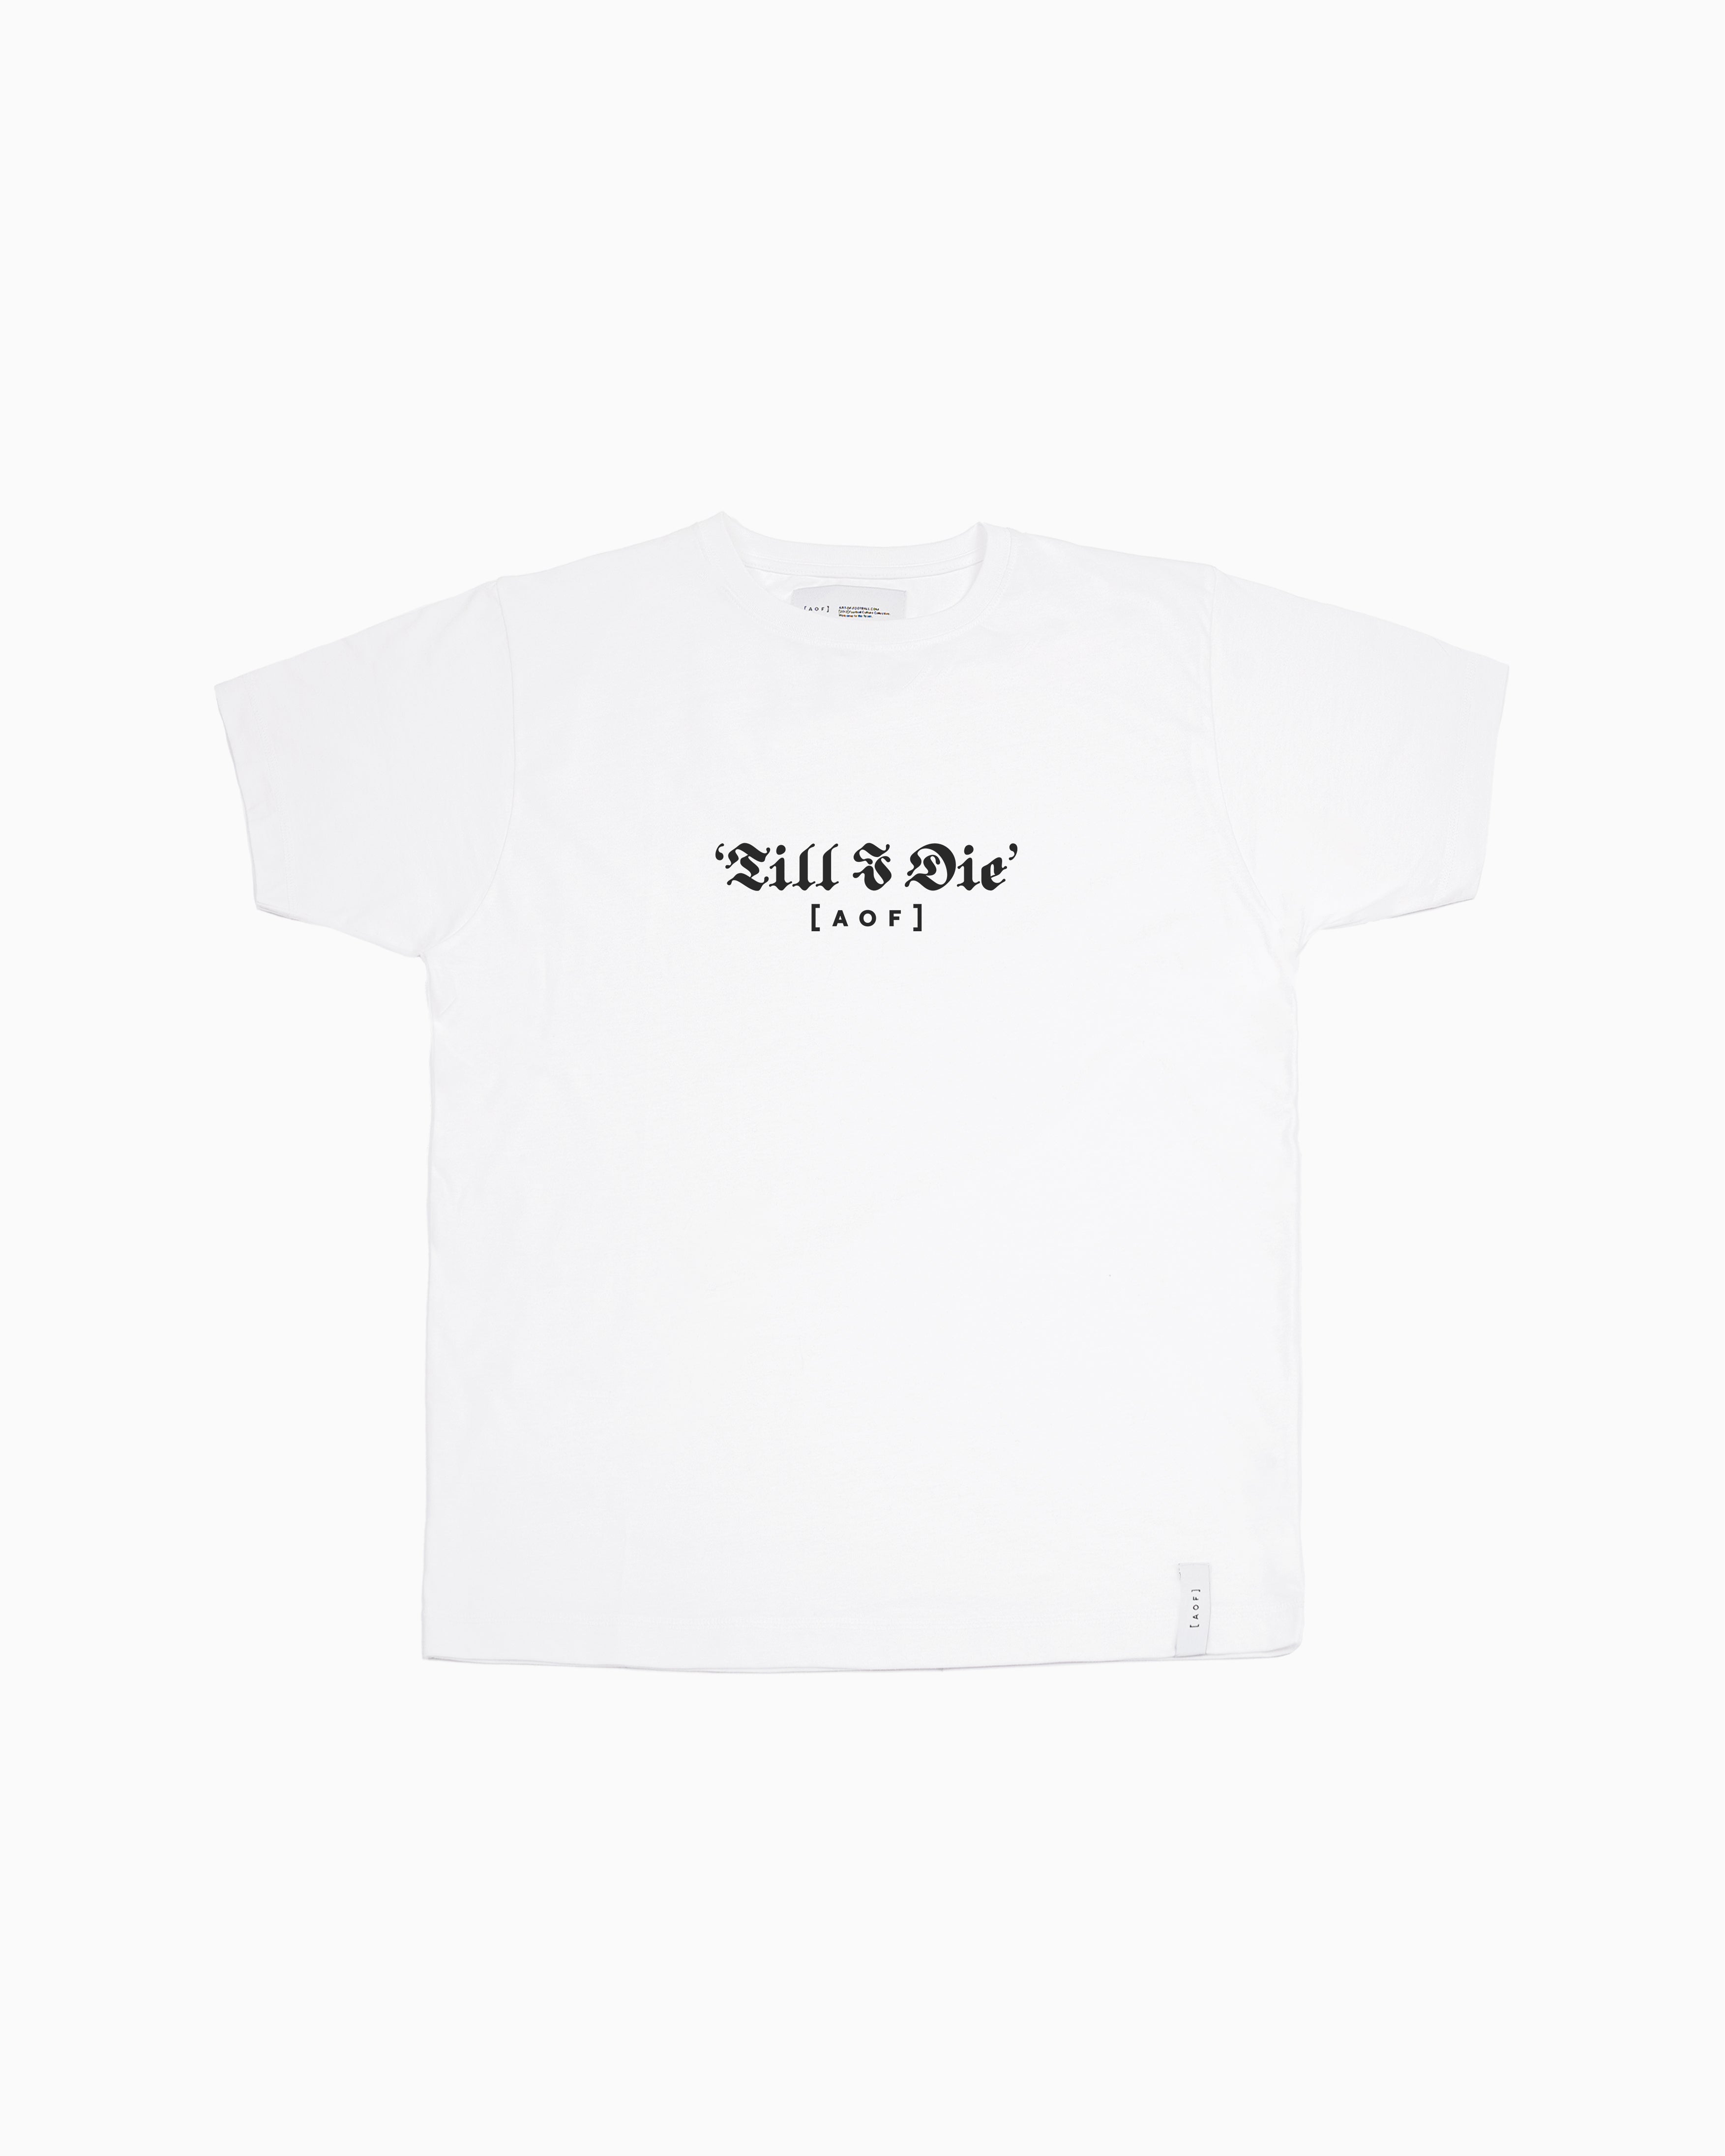 COYS 'Till I Die' - Tee or Sweat